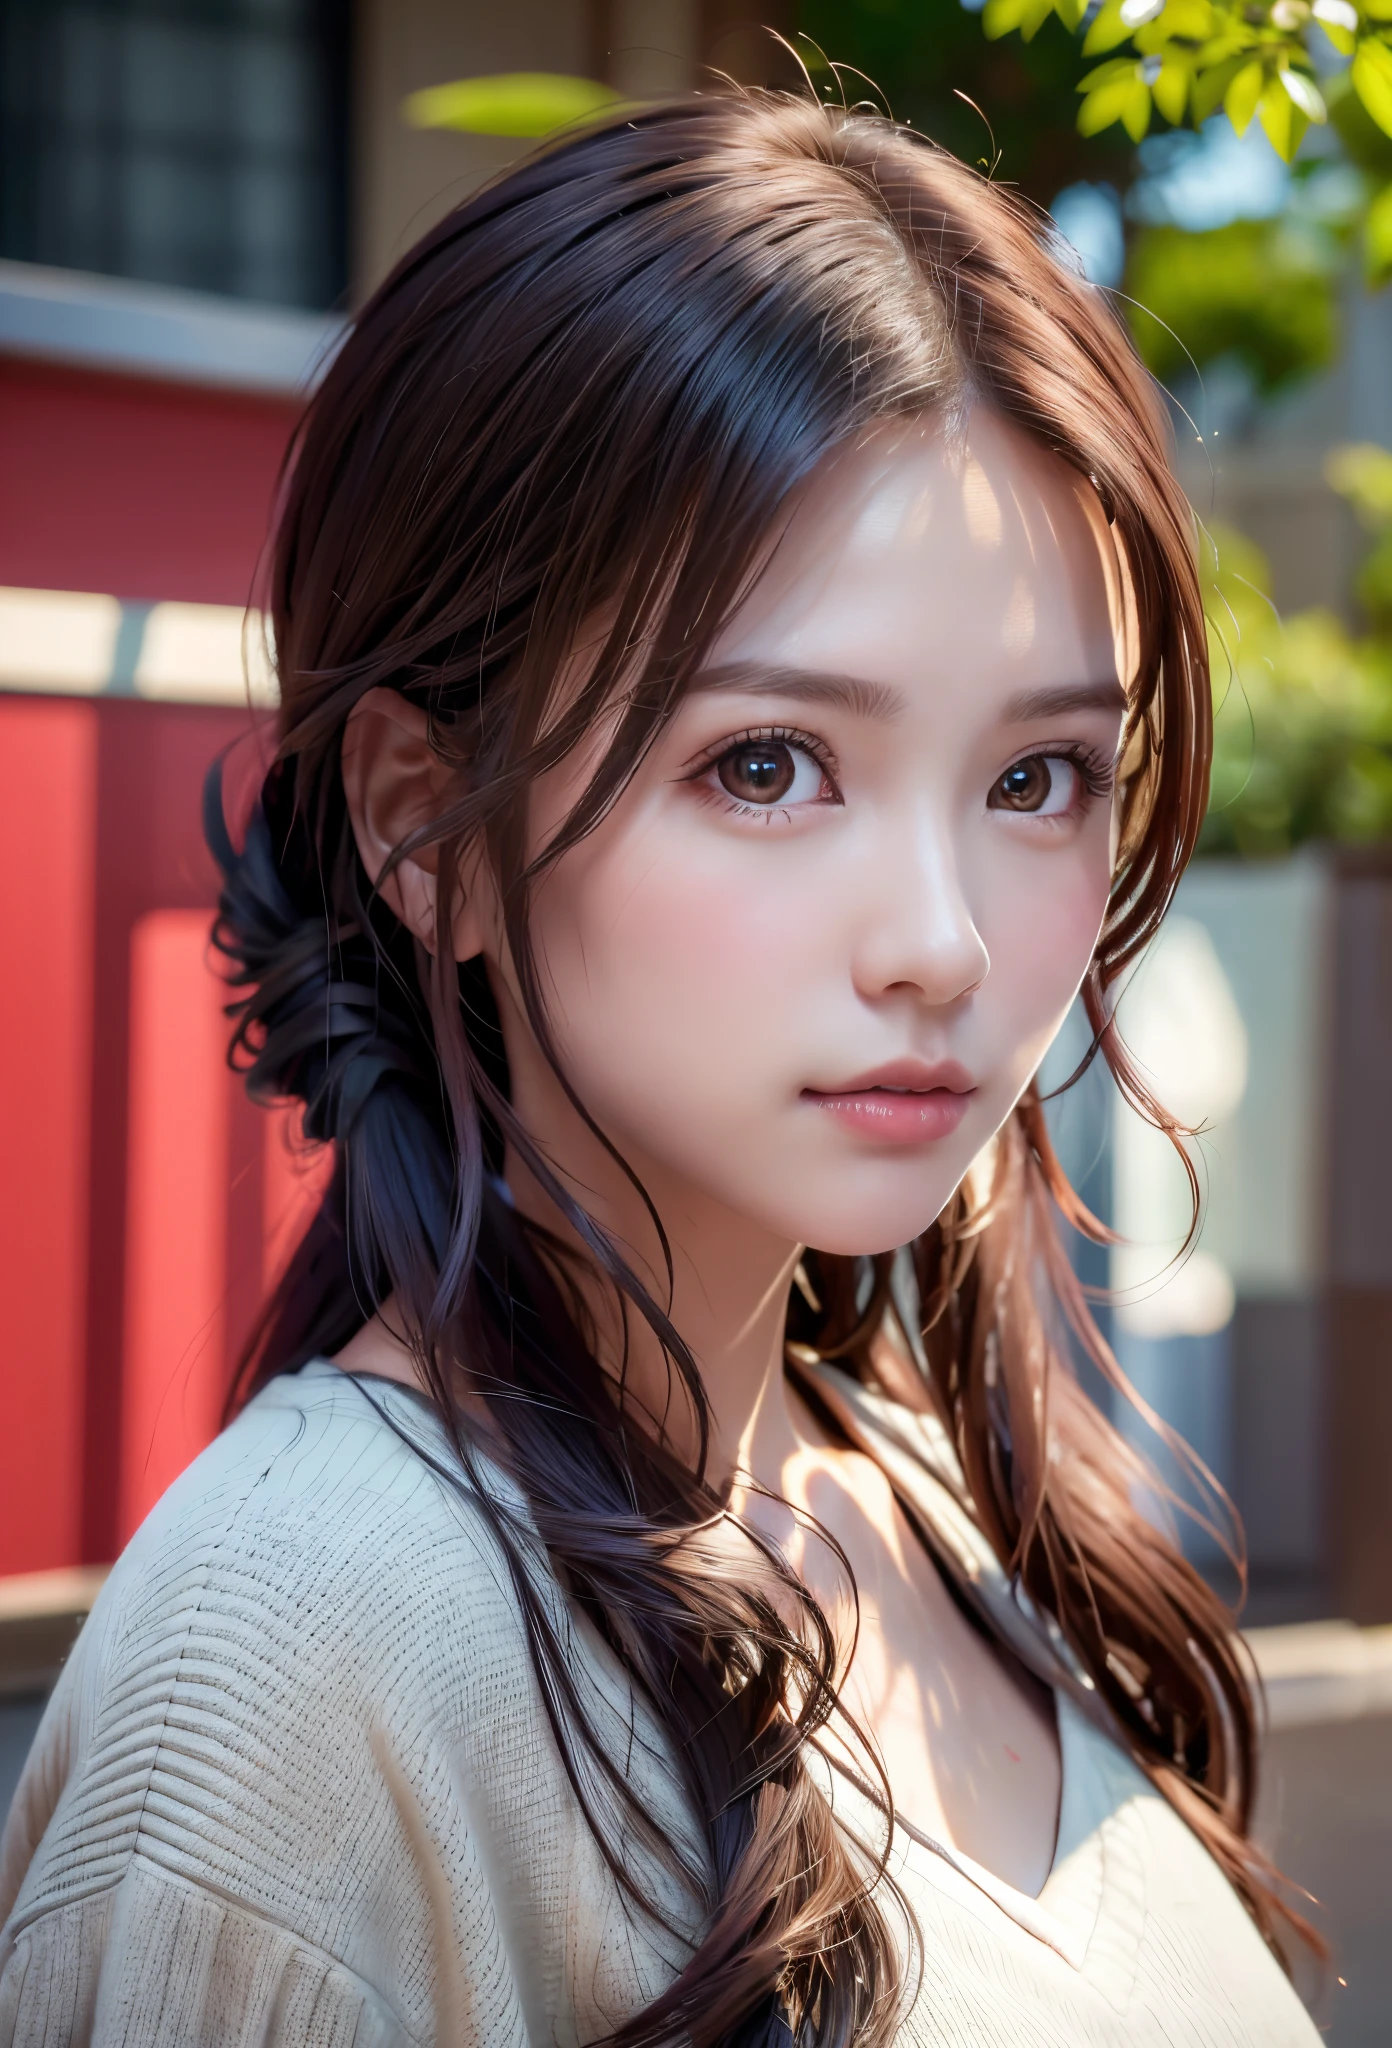 8K, of the highest quality, masutepiece:1.2), (Realistic, Photorealsitic:1.37), of the highest quality, masutepiece, Beautiful young woman, Pensive expression,、A charming、and an inviting look, Oversized knitwear、Hair tied back, Cinematic background, Light skin tone